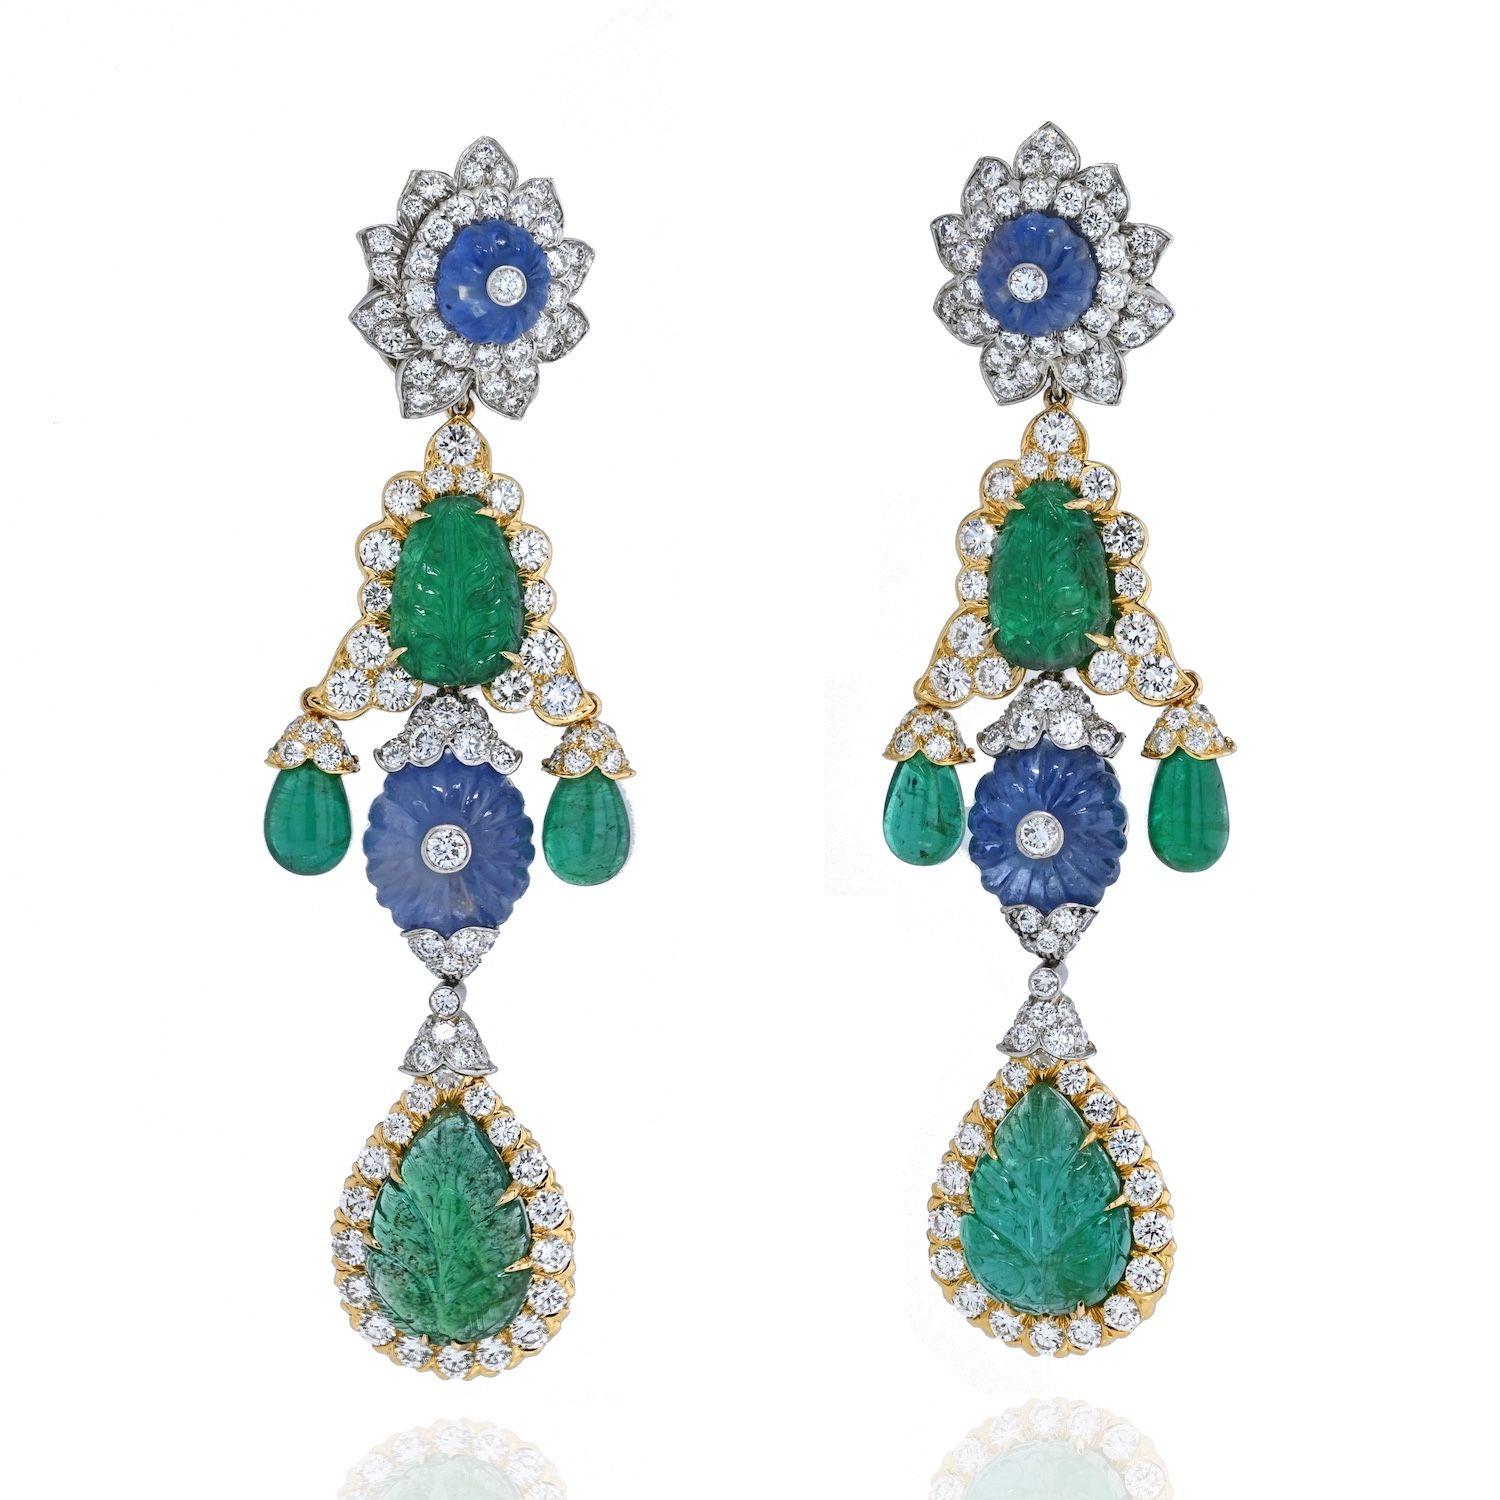 An impressive pair of earrings designed by David Webb. Easily converted from day-to-night, the earrings feature two detachable drops. 
Crafted in 18 karat yellow gold and platinum, the earrings center on carved emeralds, carved sapphire fluted